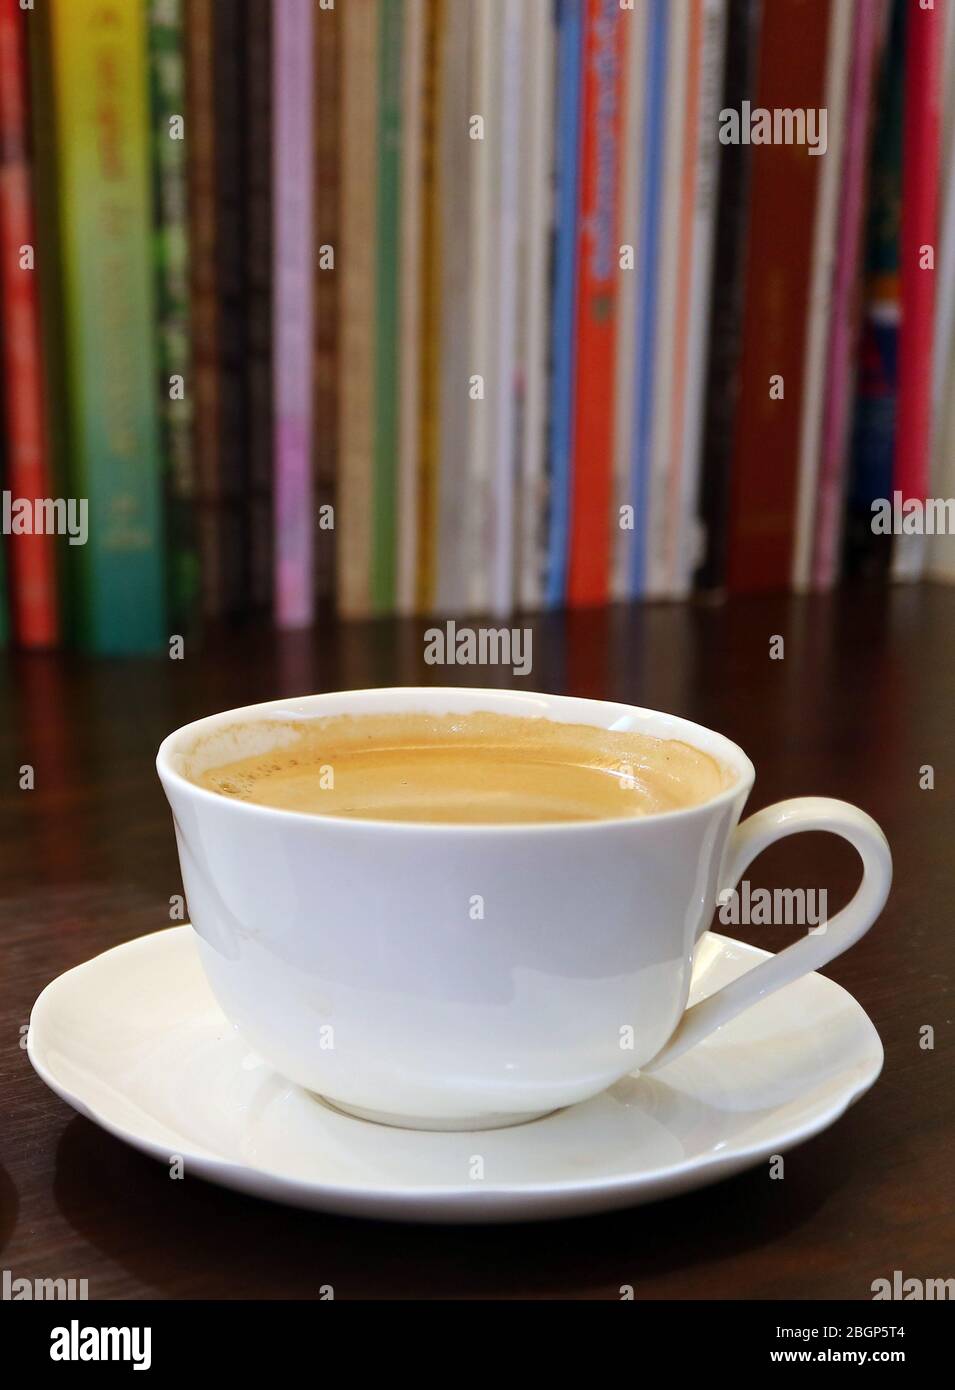 Vertical Image of a Cup of Hot Coffee with Blurry Book Shelf in Background Stock Photo